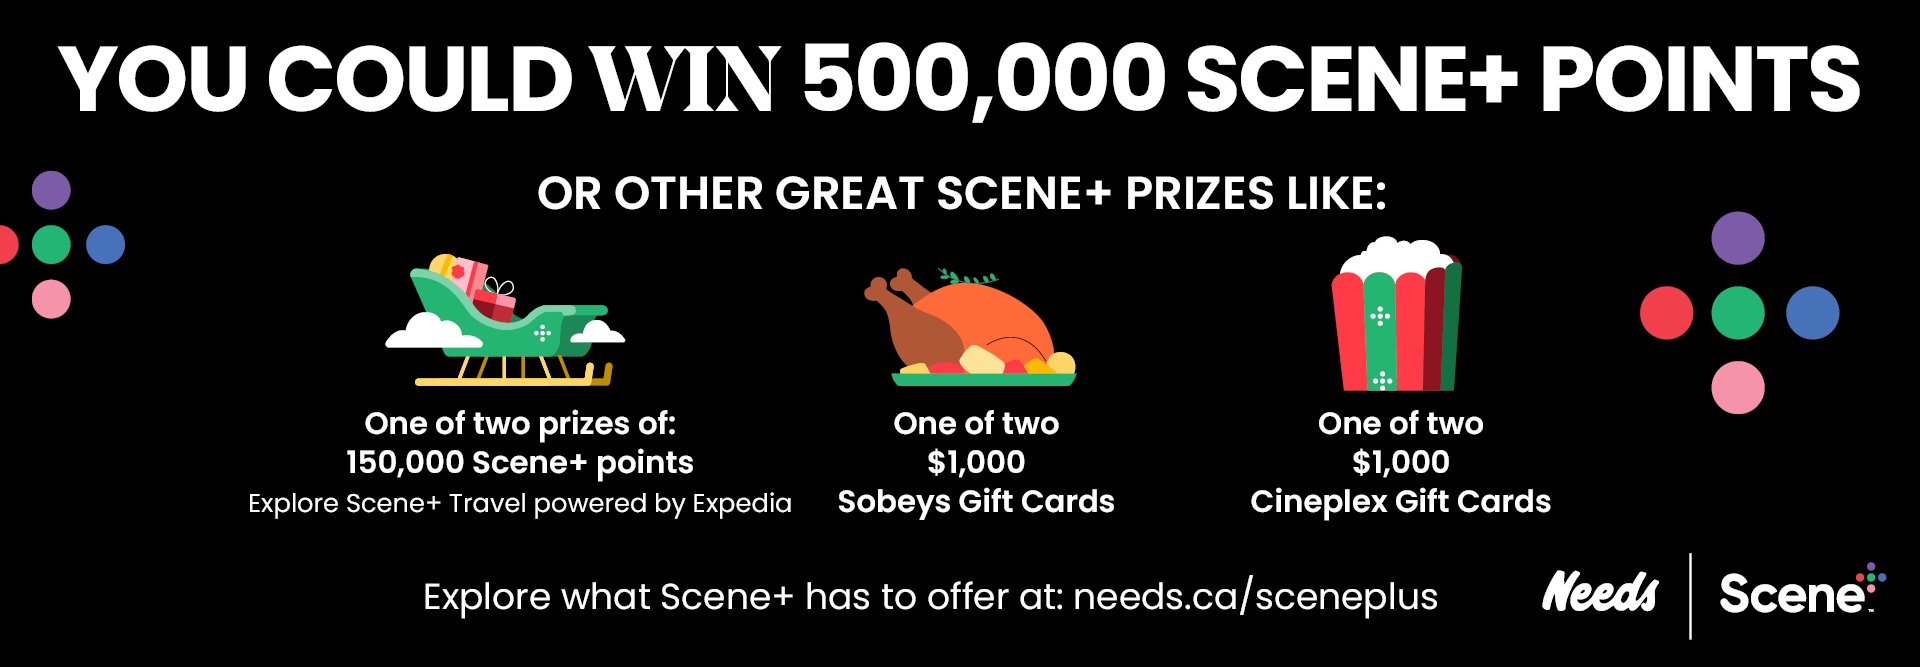 Text Reading 'You could win 500,000 Scene+ Points or other great Scene+ prizes like: One of two prizes of: 150,000 Scene+ points (Explore Scene+ Travel powered by Expedia), one of two $1,000 Sobeys Gift Cards, one of two $1,000 Cineplex Gift Cards. Explore what Scene+ has to offer at: needs.ca/sceneplus.'